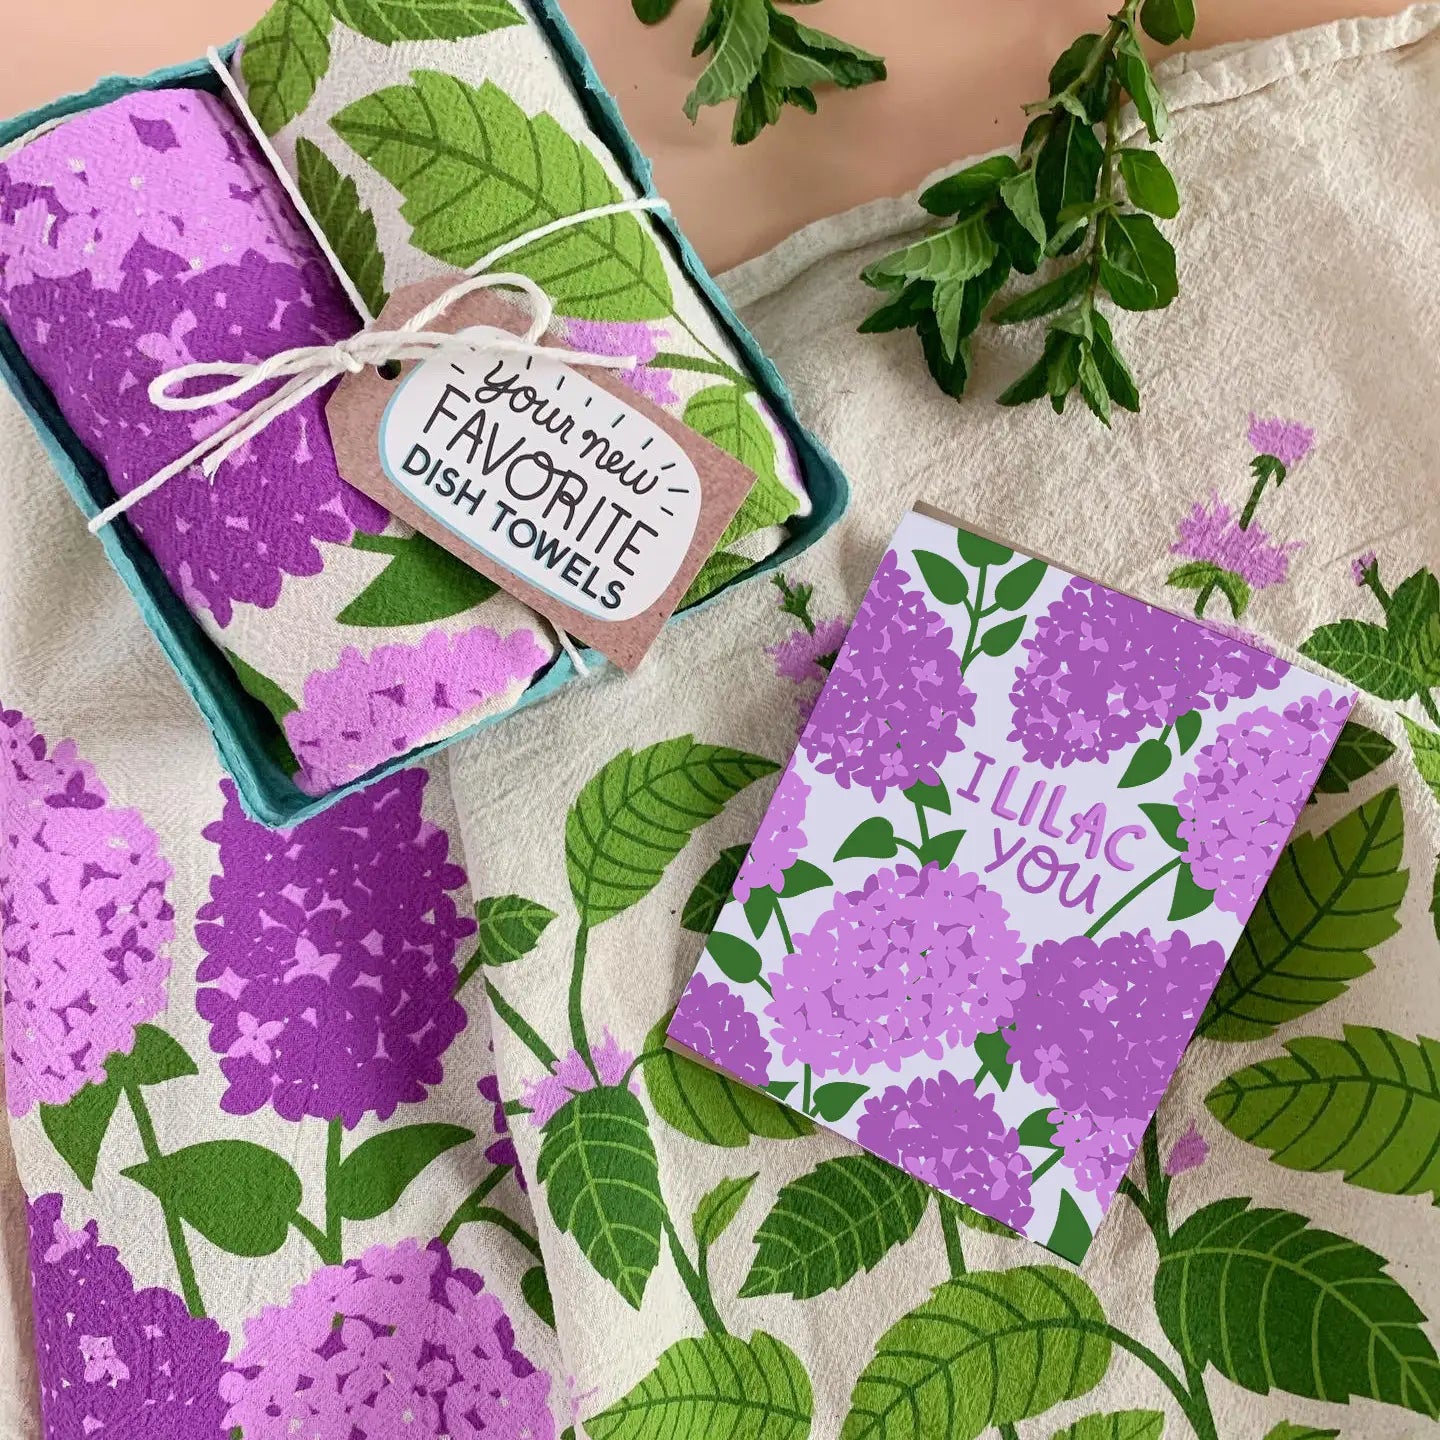 This dish towel gift sets are packaged up ready for gifting! The I Lilac Purple set contains 2 100% cotton, unbleached kitchen towels: Lilac & Mint